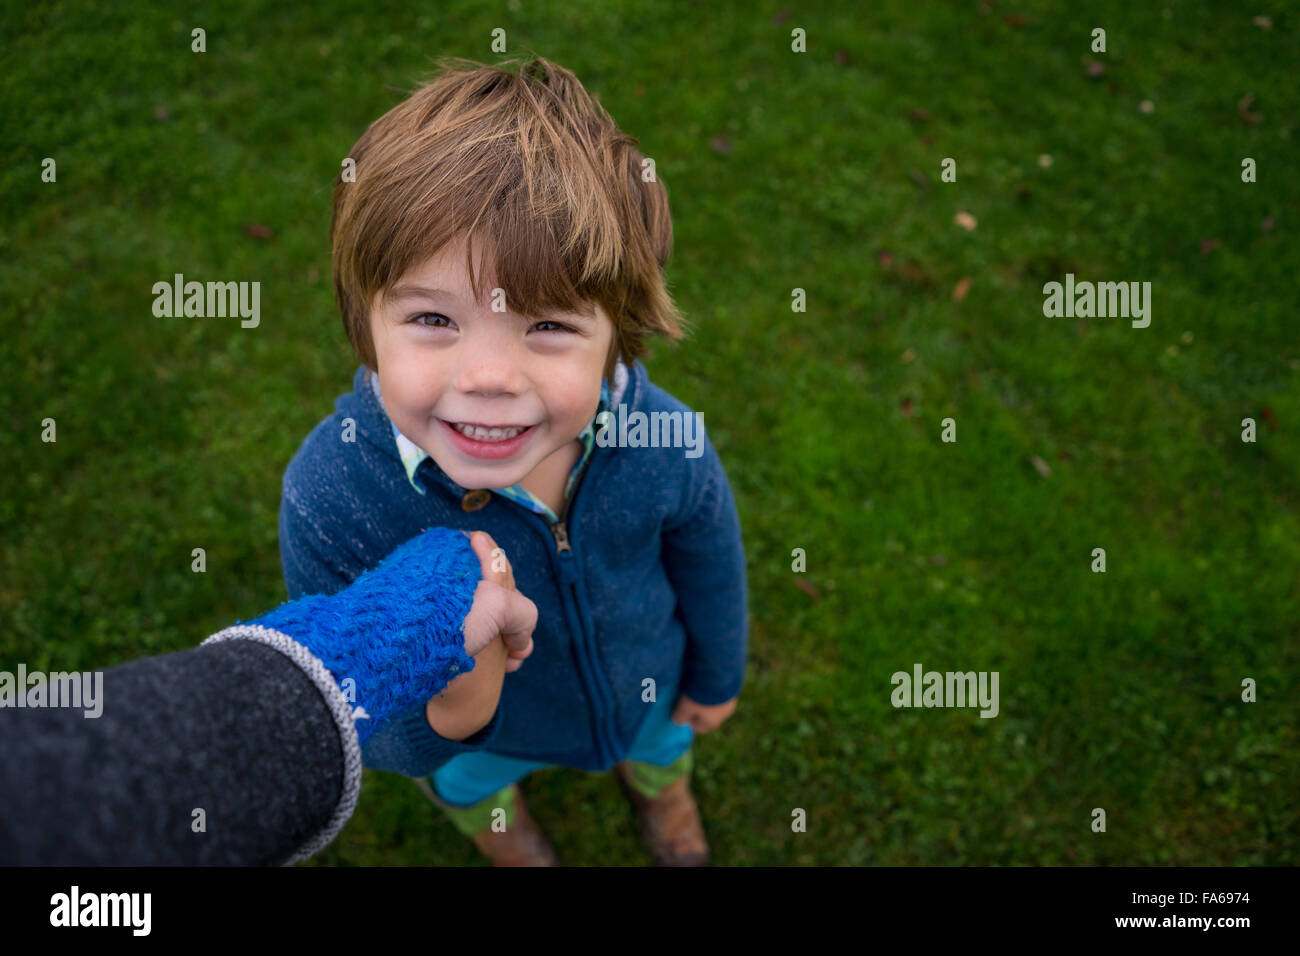 Smiling boy holding mother's hand Stock Photo